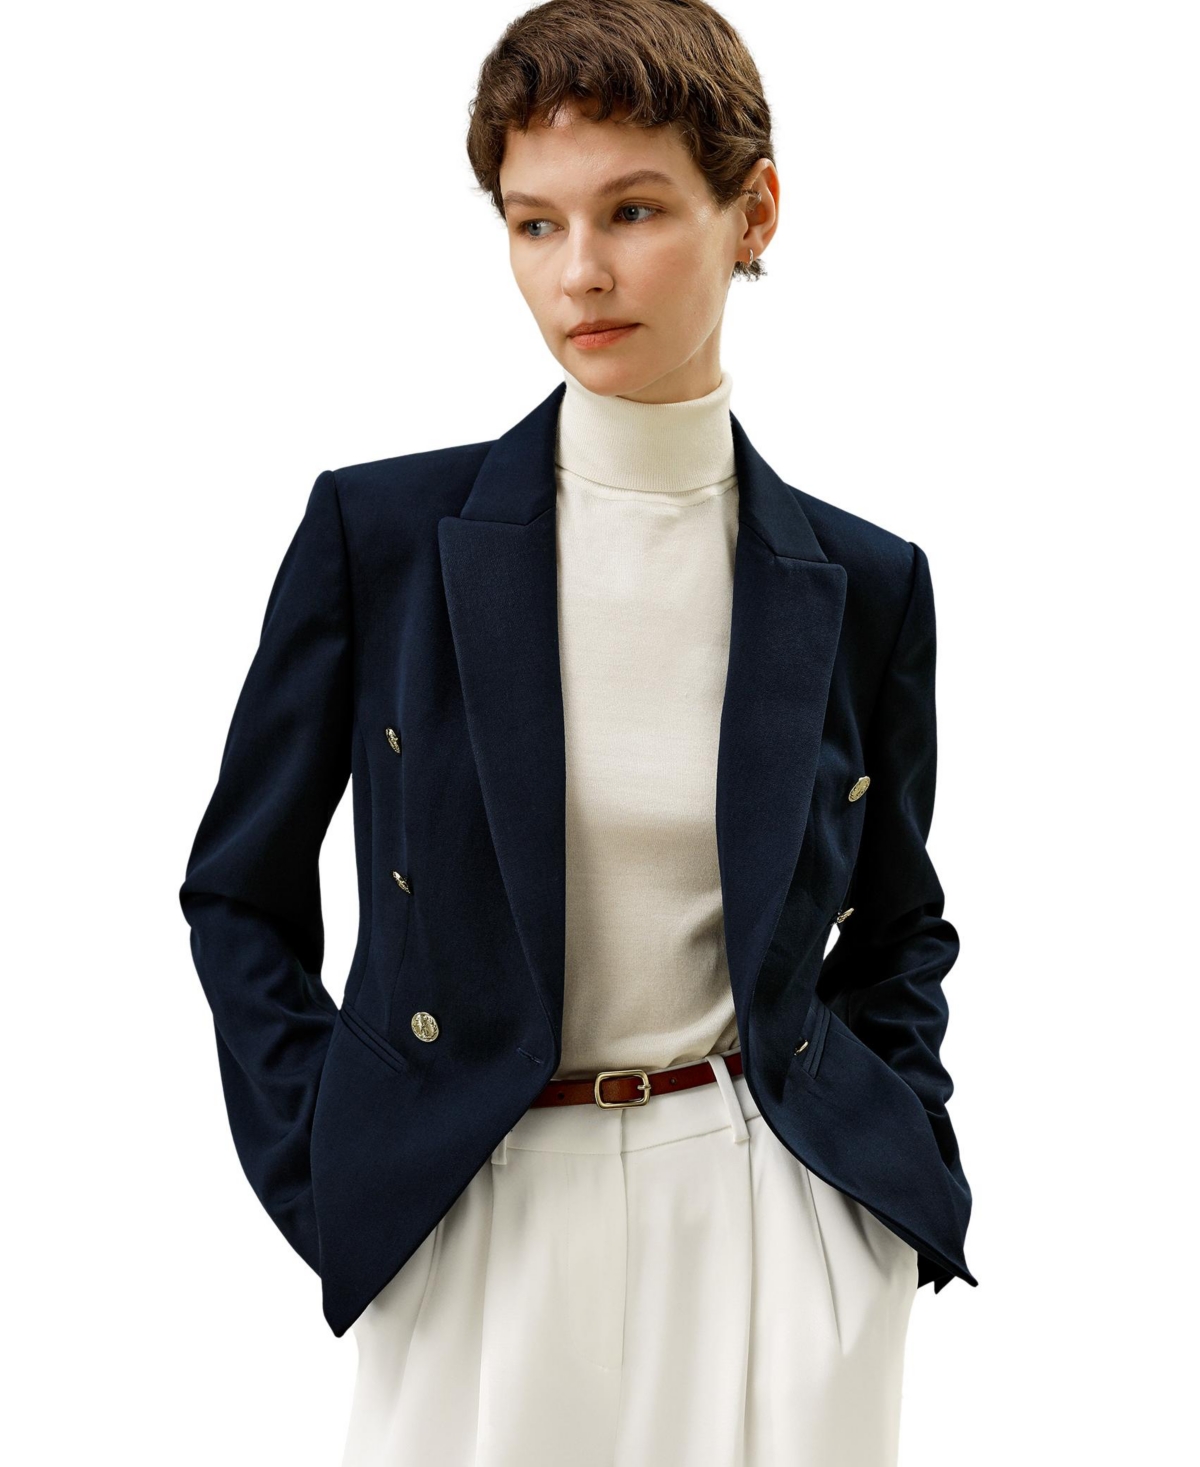 Women's Tailored Double-Breasted Blazer for Women - Navy blue